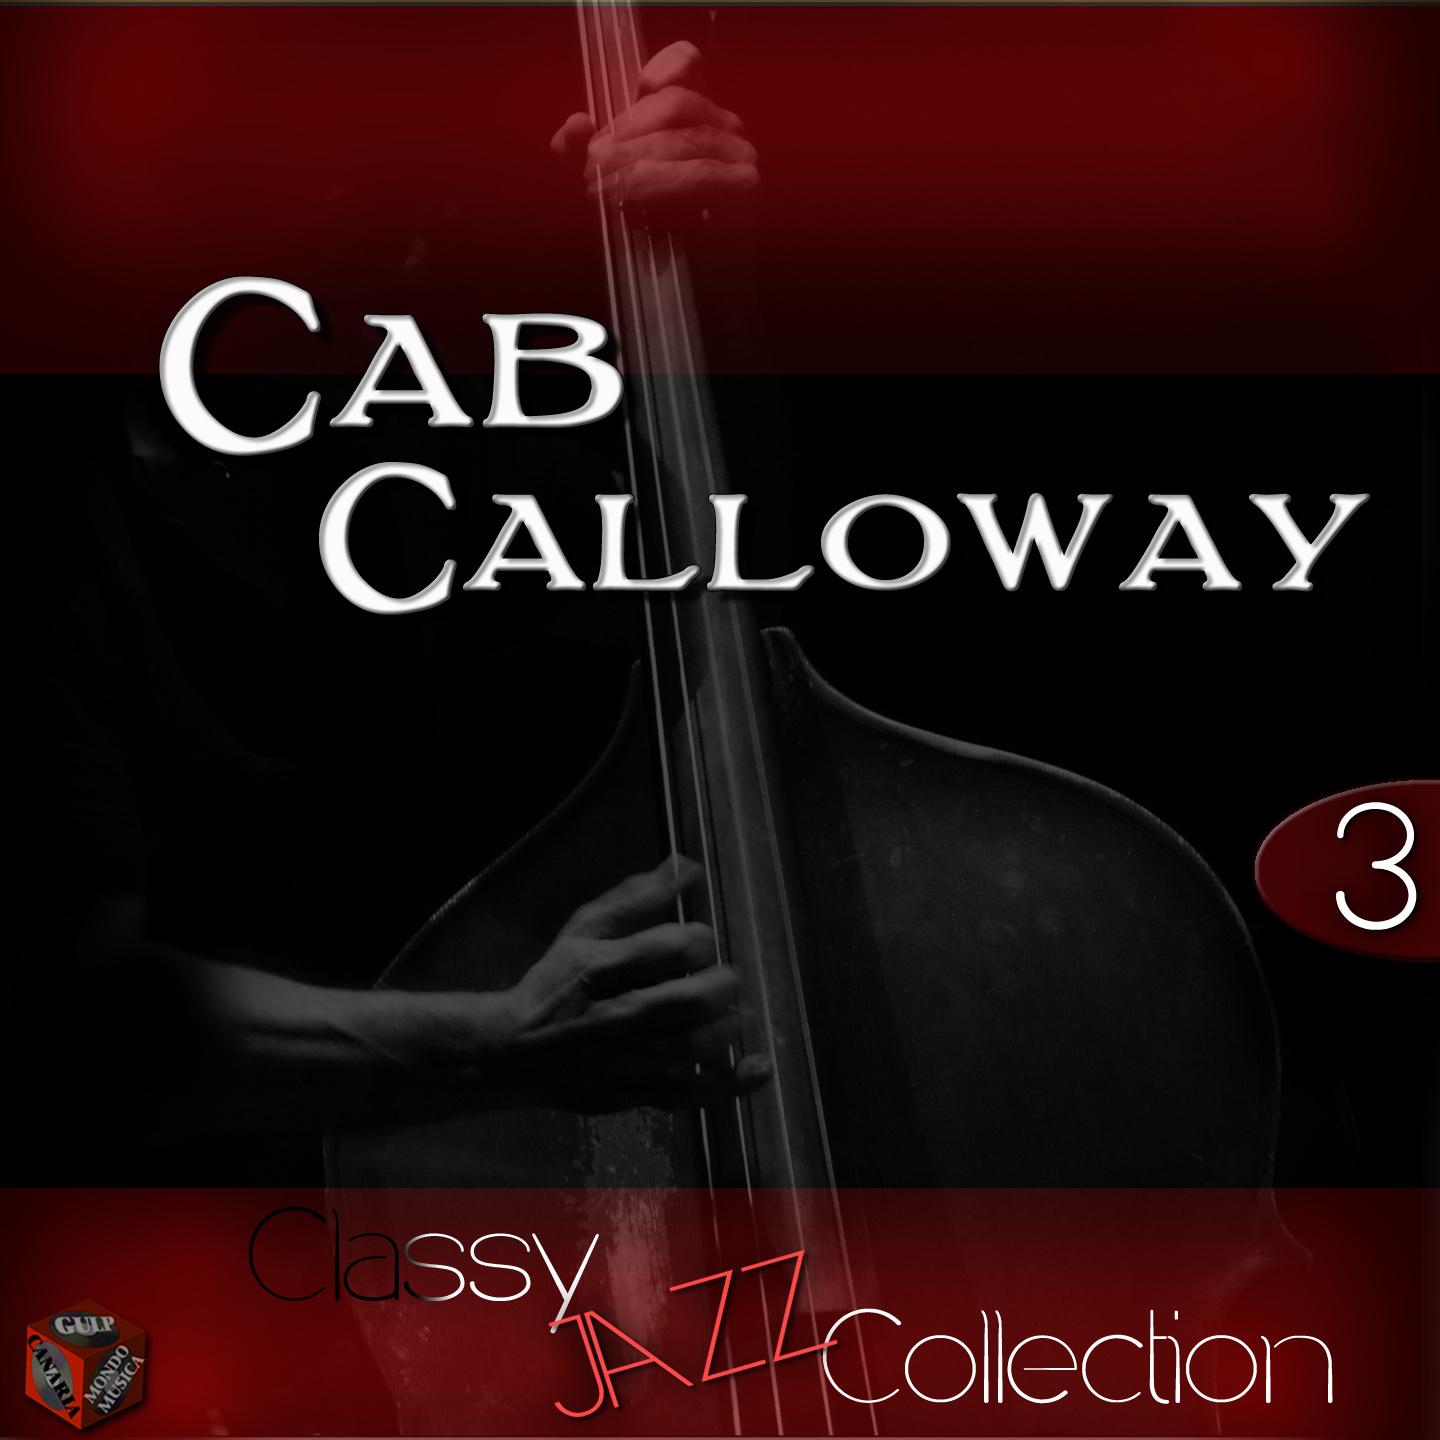 Classy Jazz Collection: Cab Calloway, Vol. 3